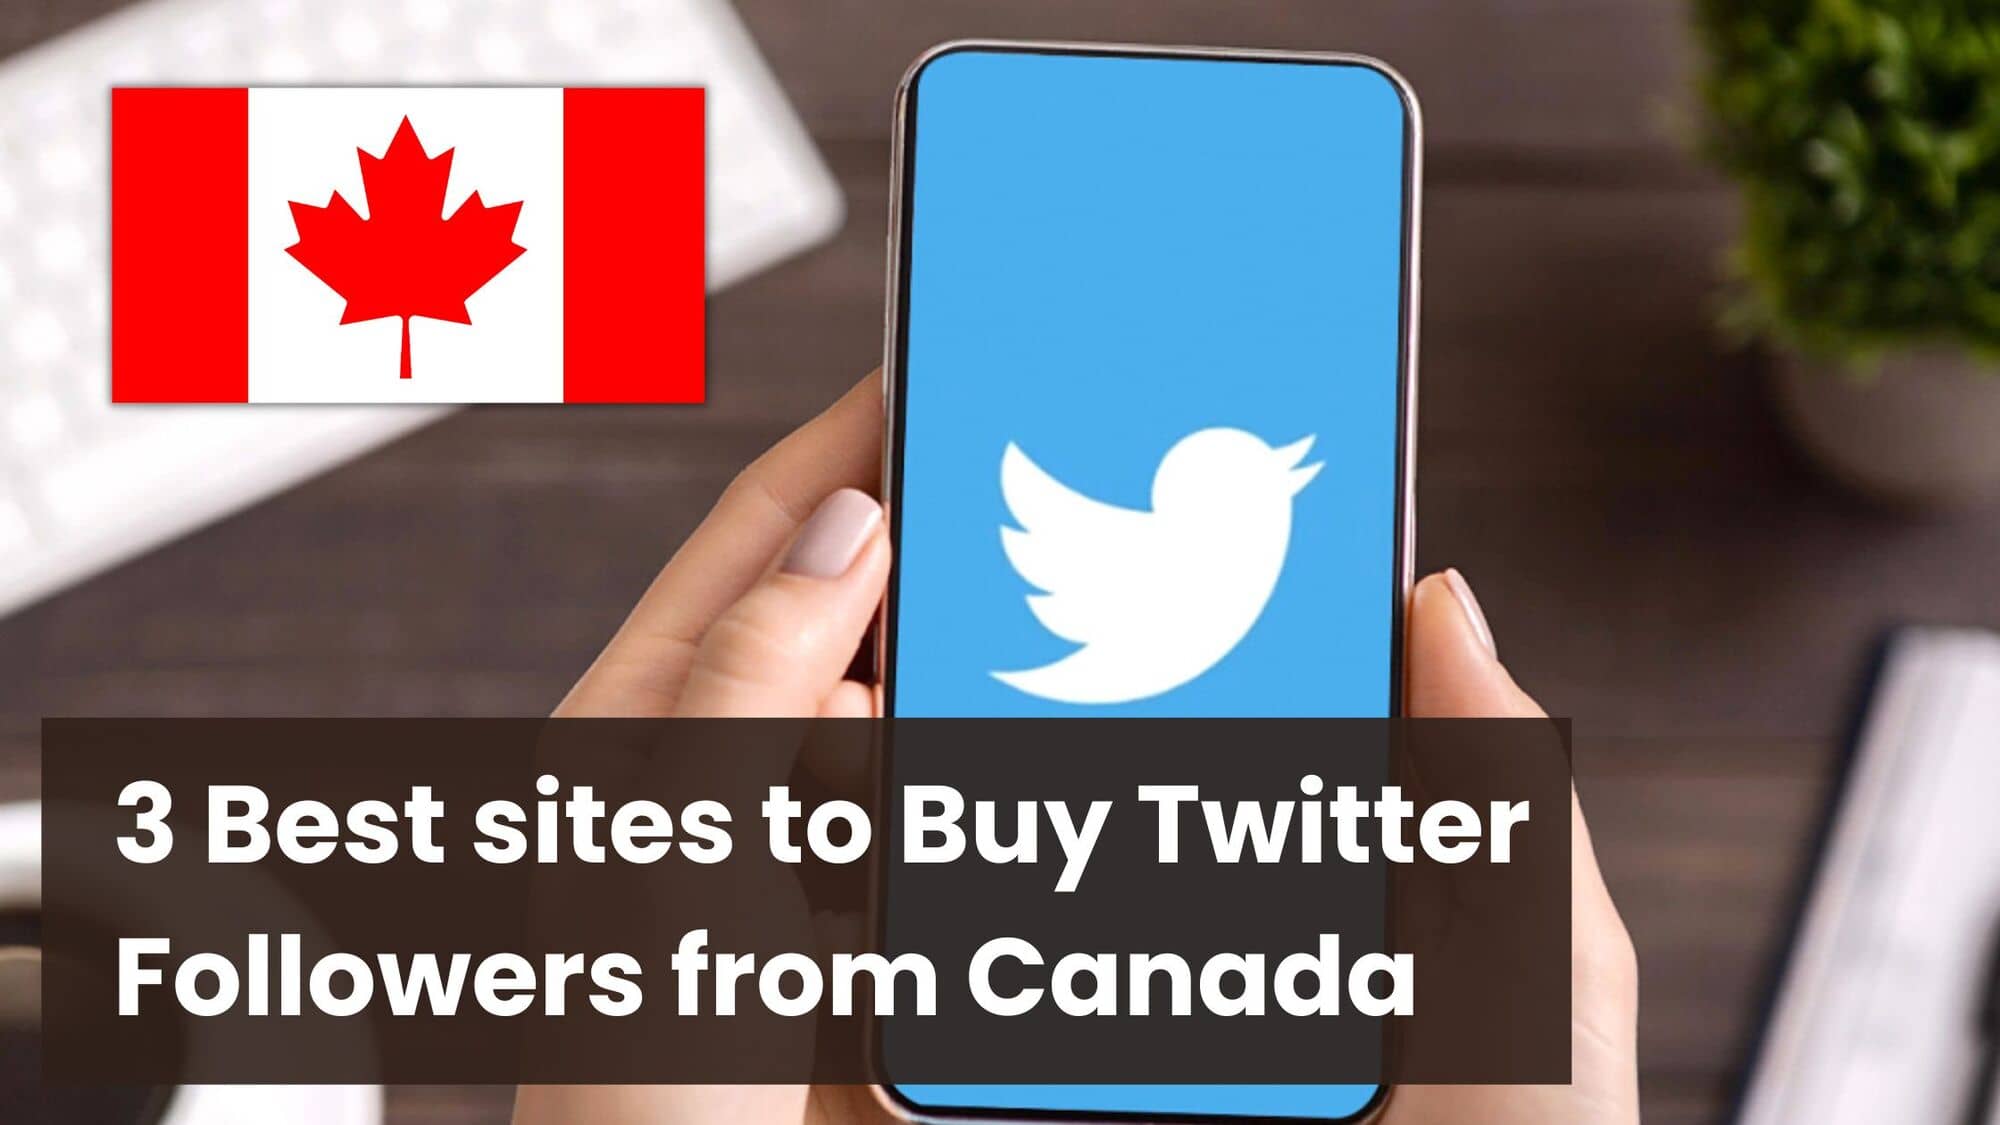 3 Best sites to Buy Twitter Followers Canada (Active & Real)